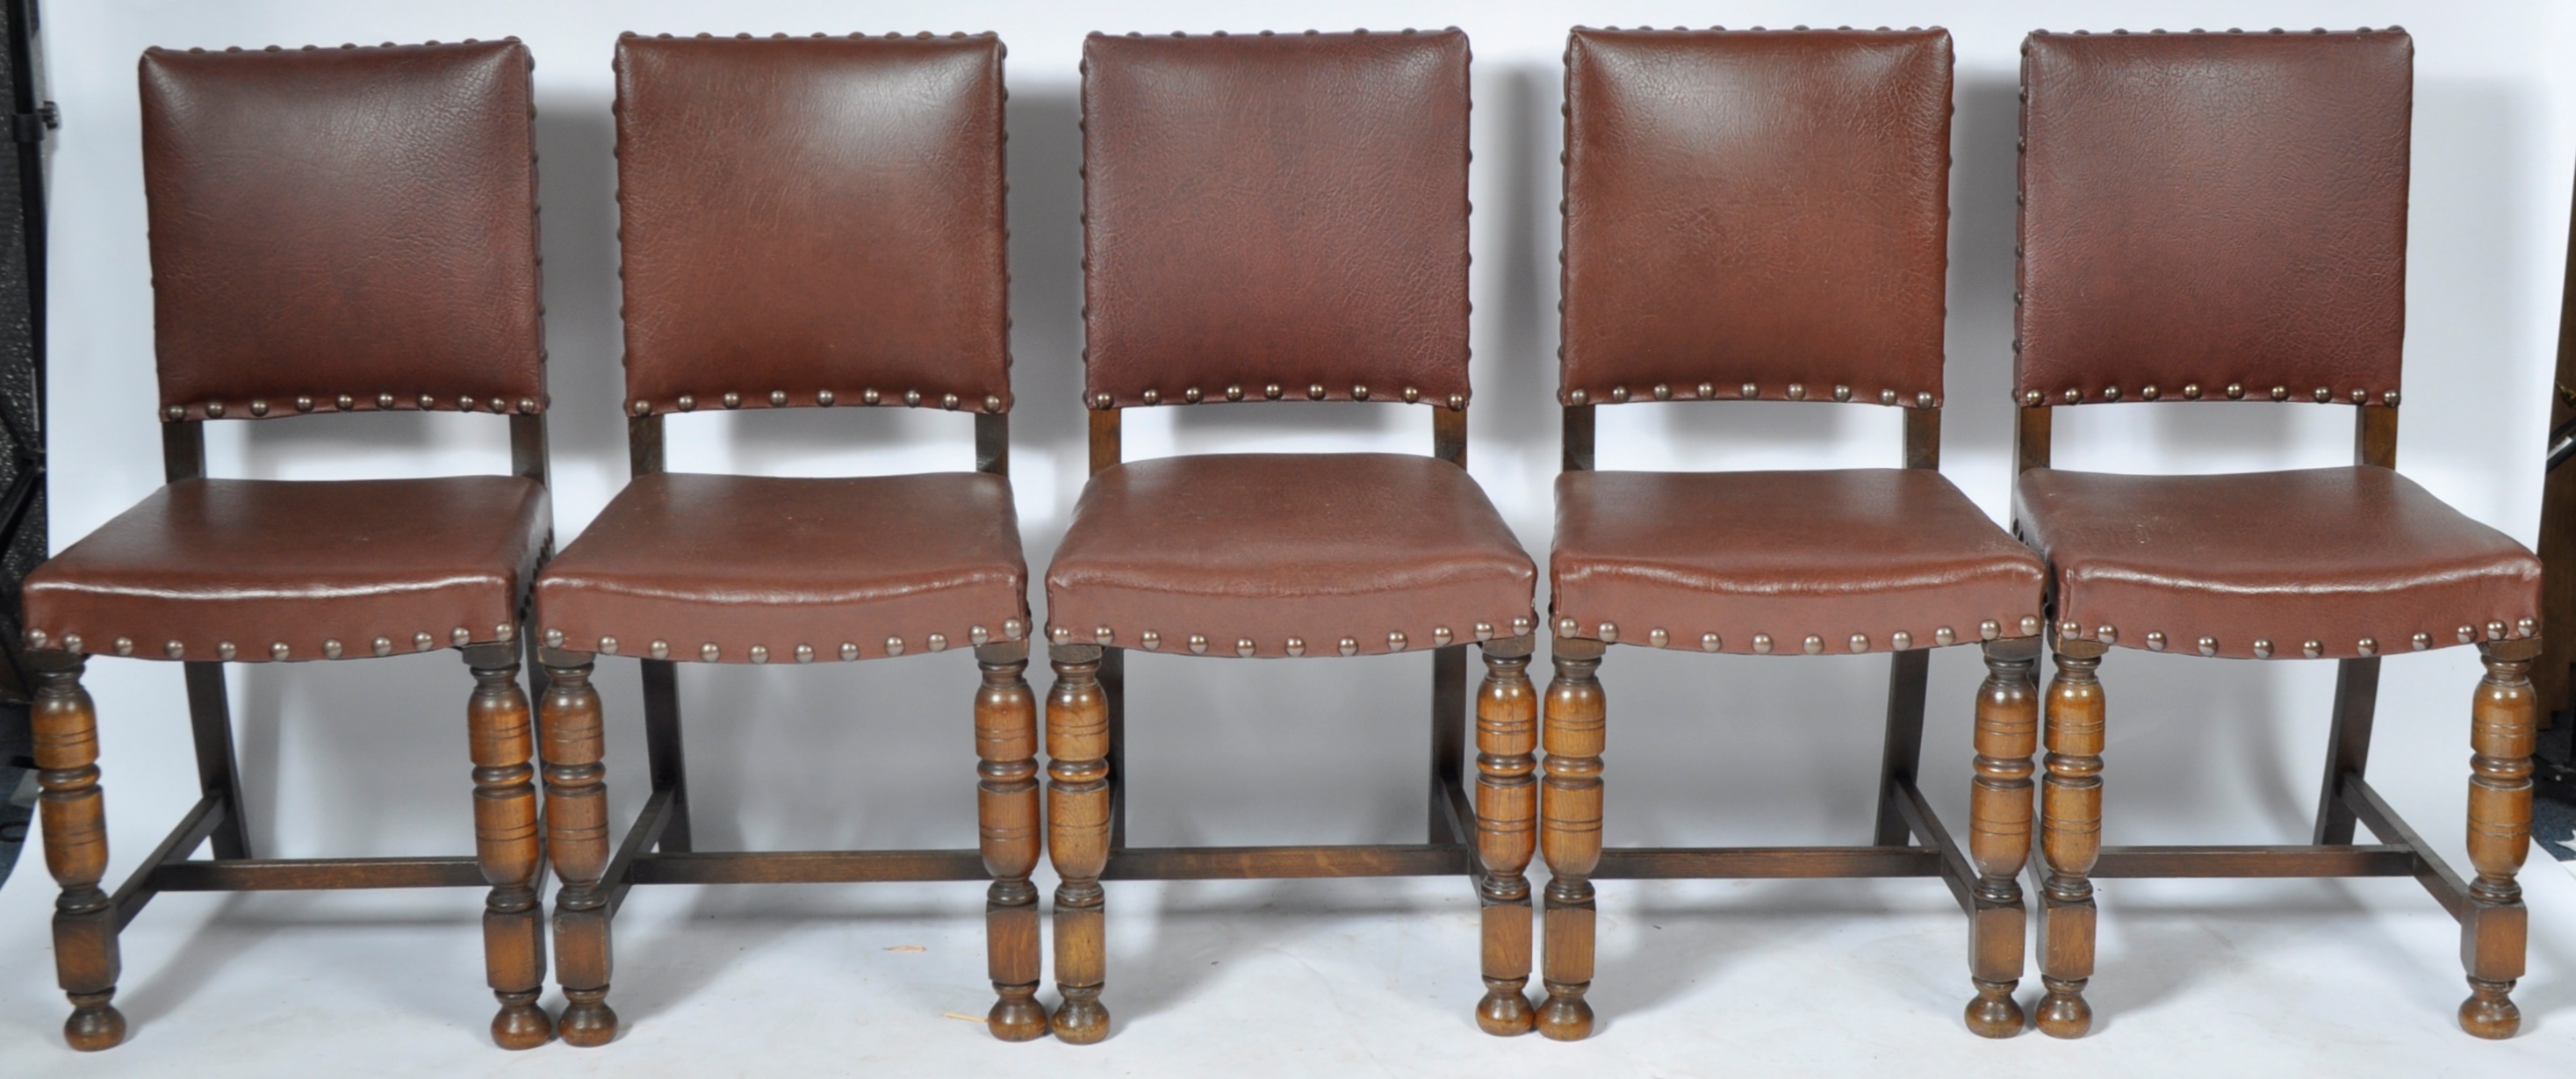 MATCHING SET OF TEN OAK AND LEATHERETTE DINING CHAIRS - Image 2 of 11